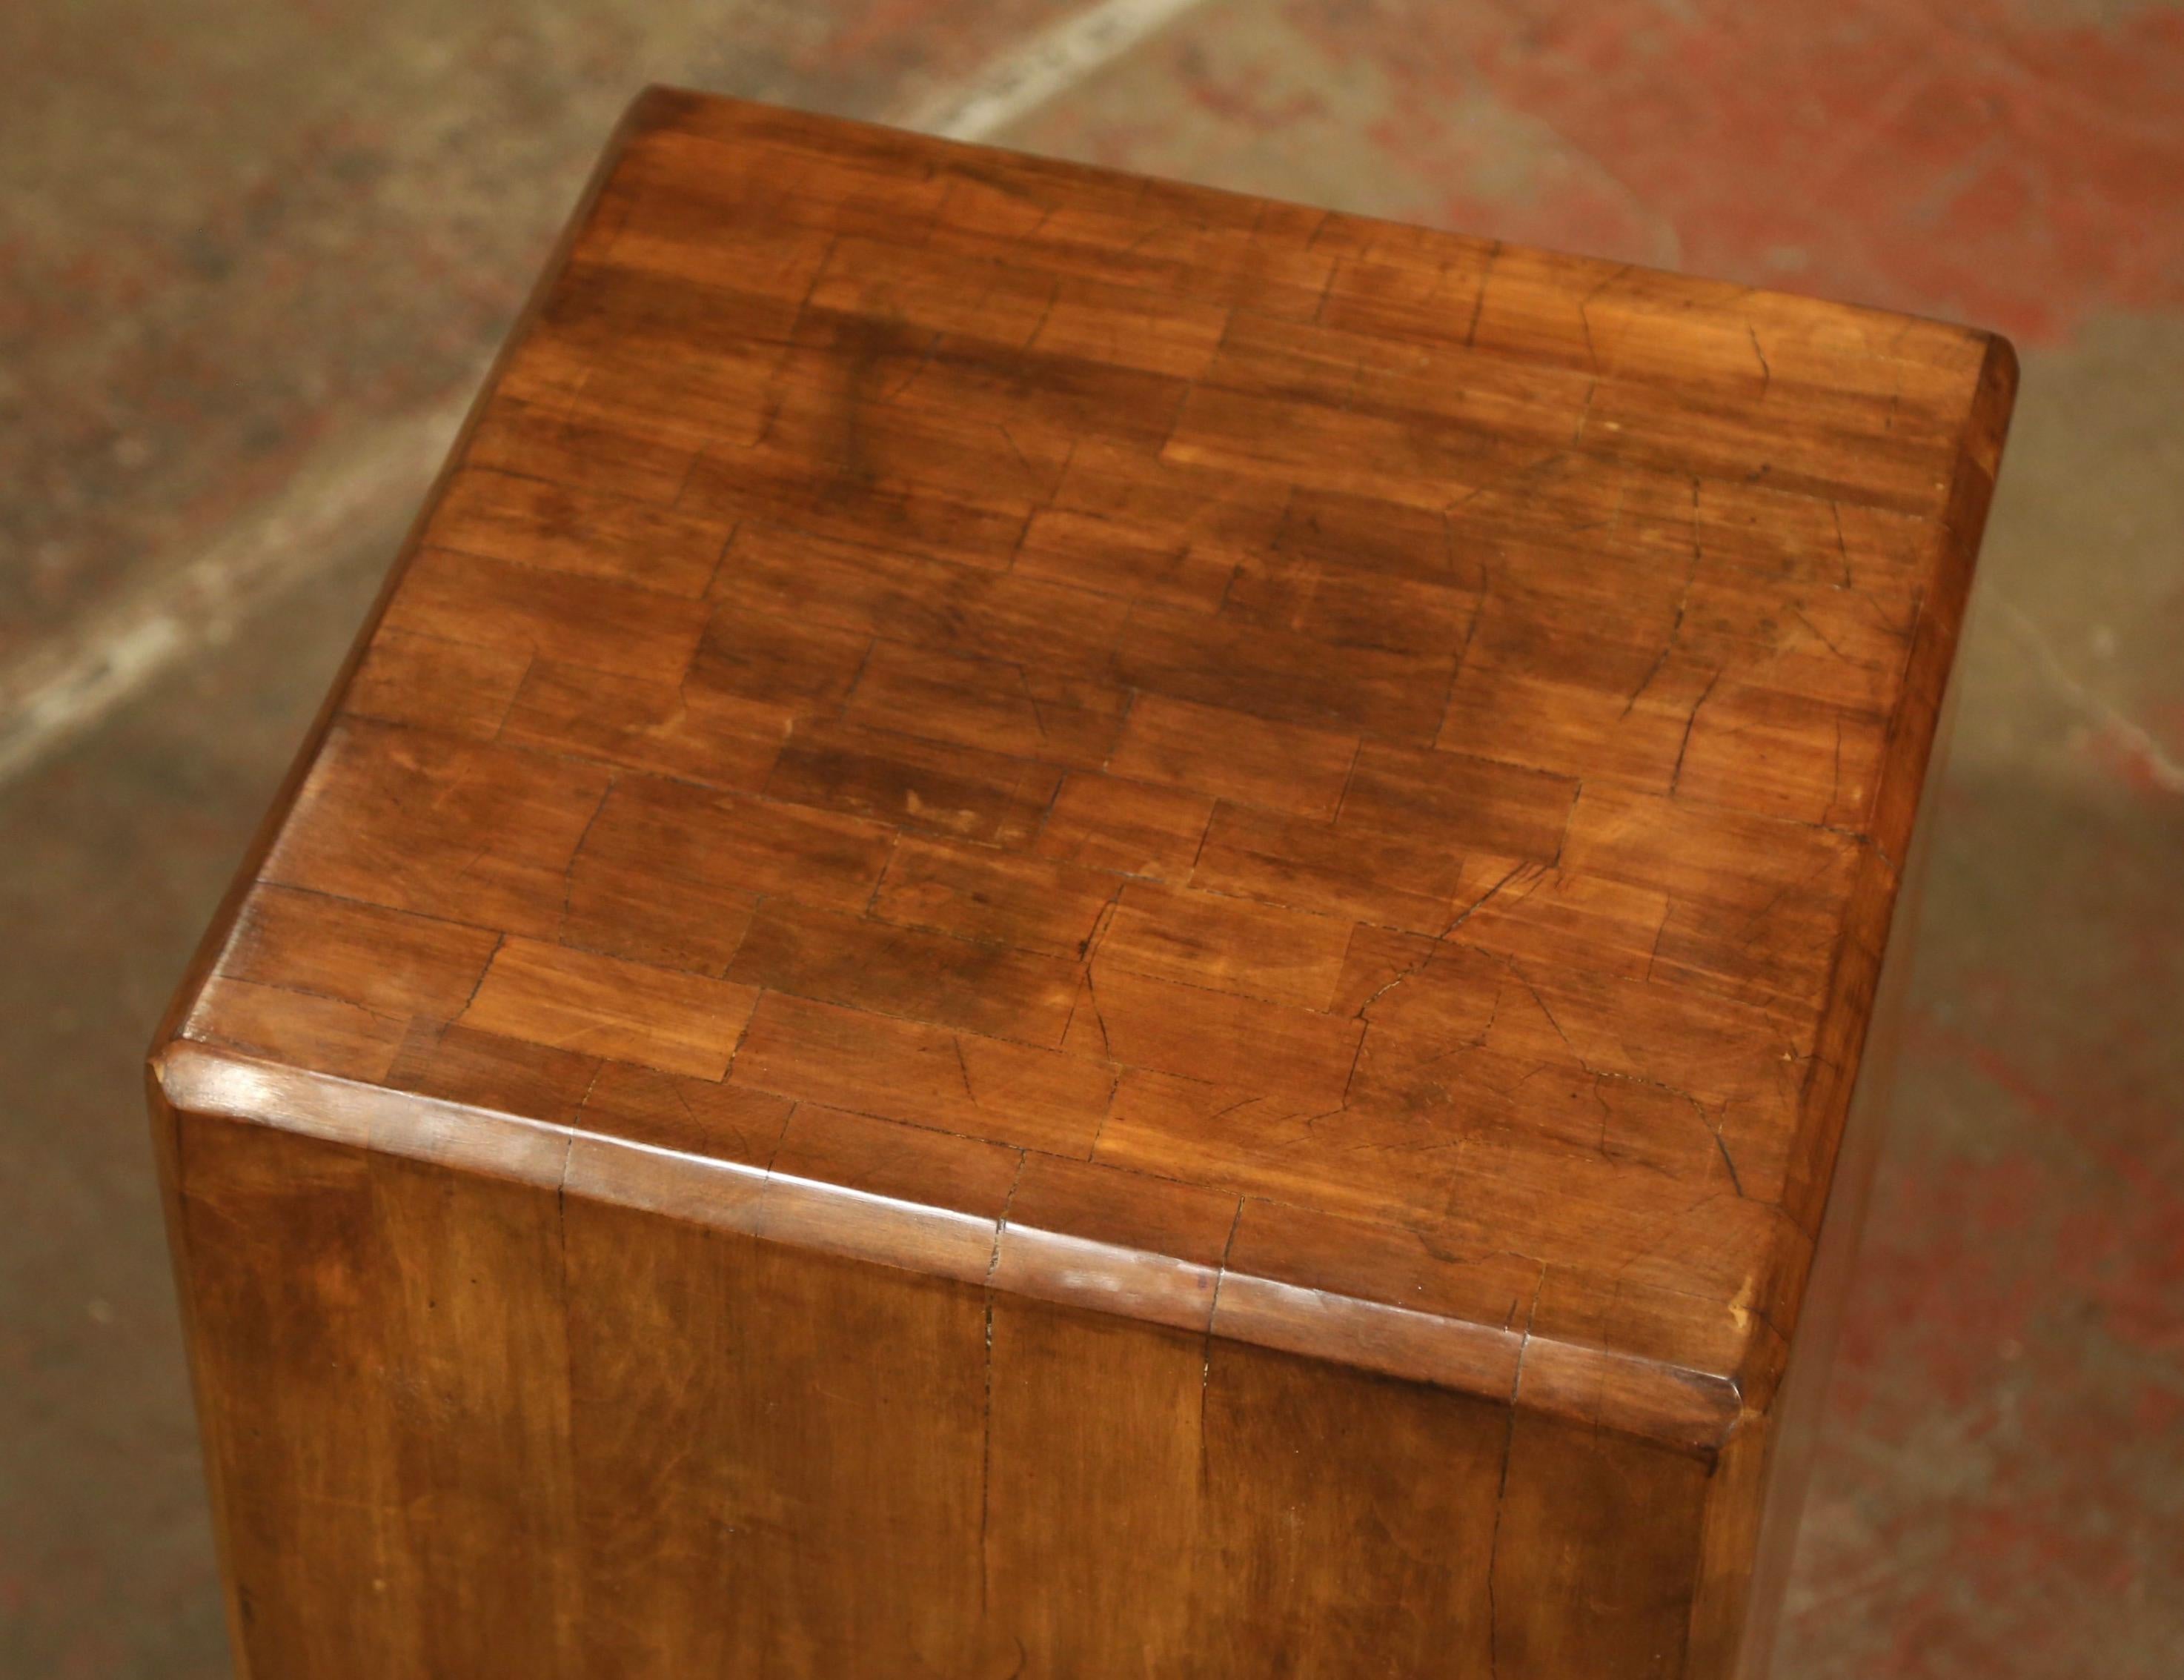 Hand-Carved Vintage Carved Patinated Maple Epicurean Butcher Block from Neiman Marcus